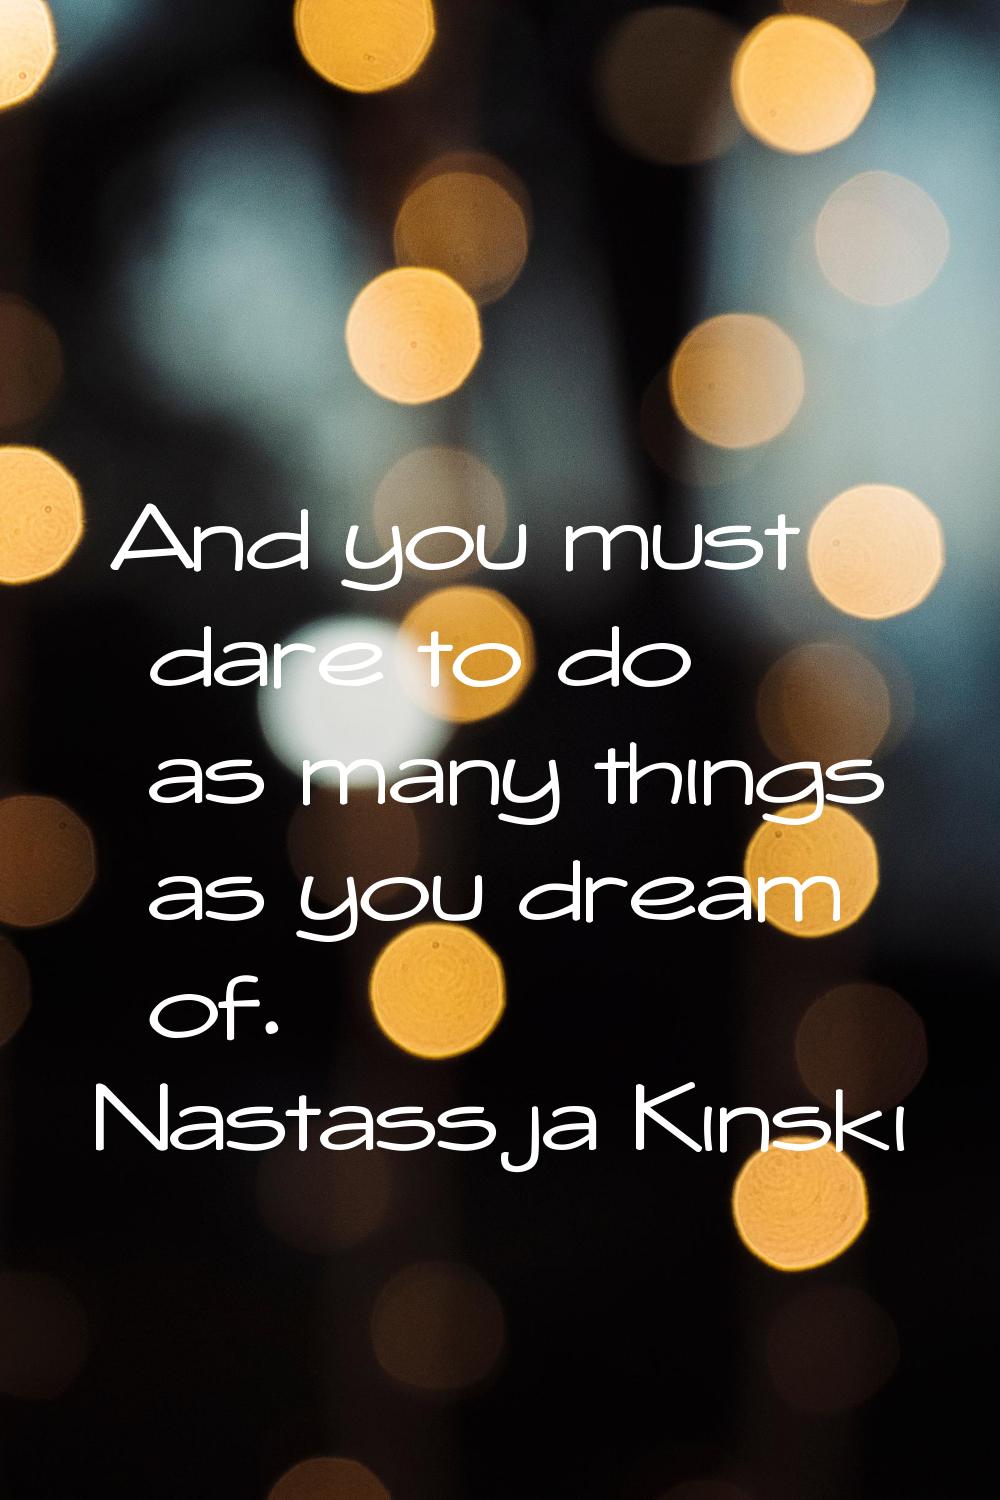 And you must dare to do as many things as you dream of.